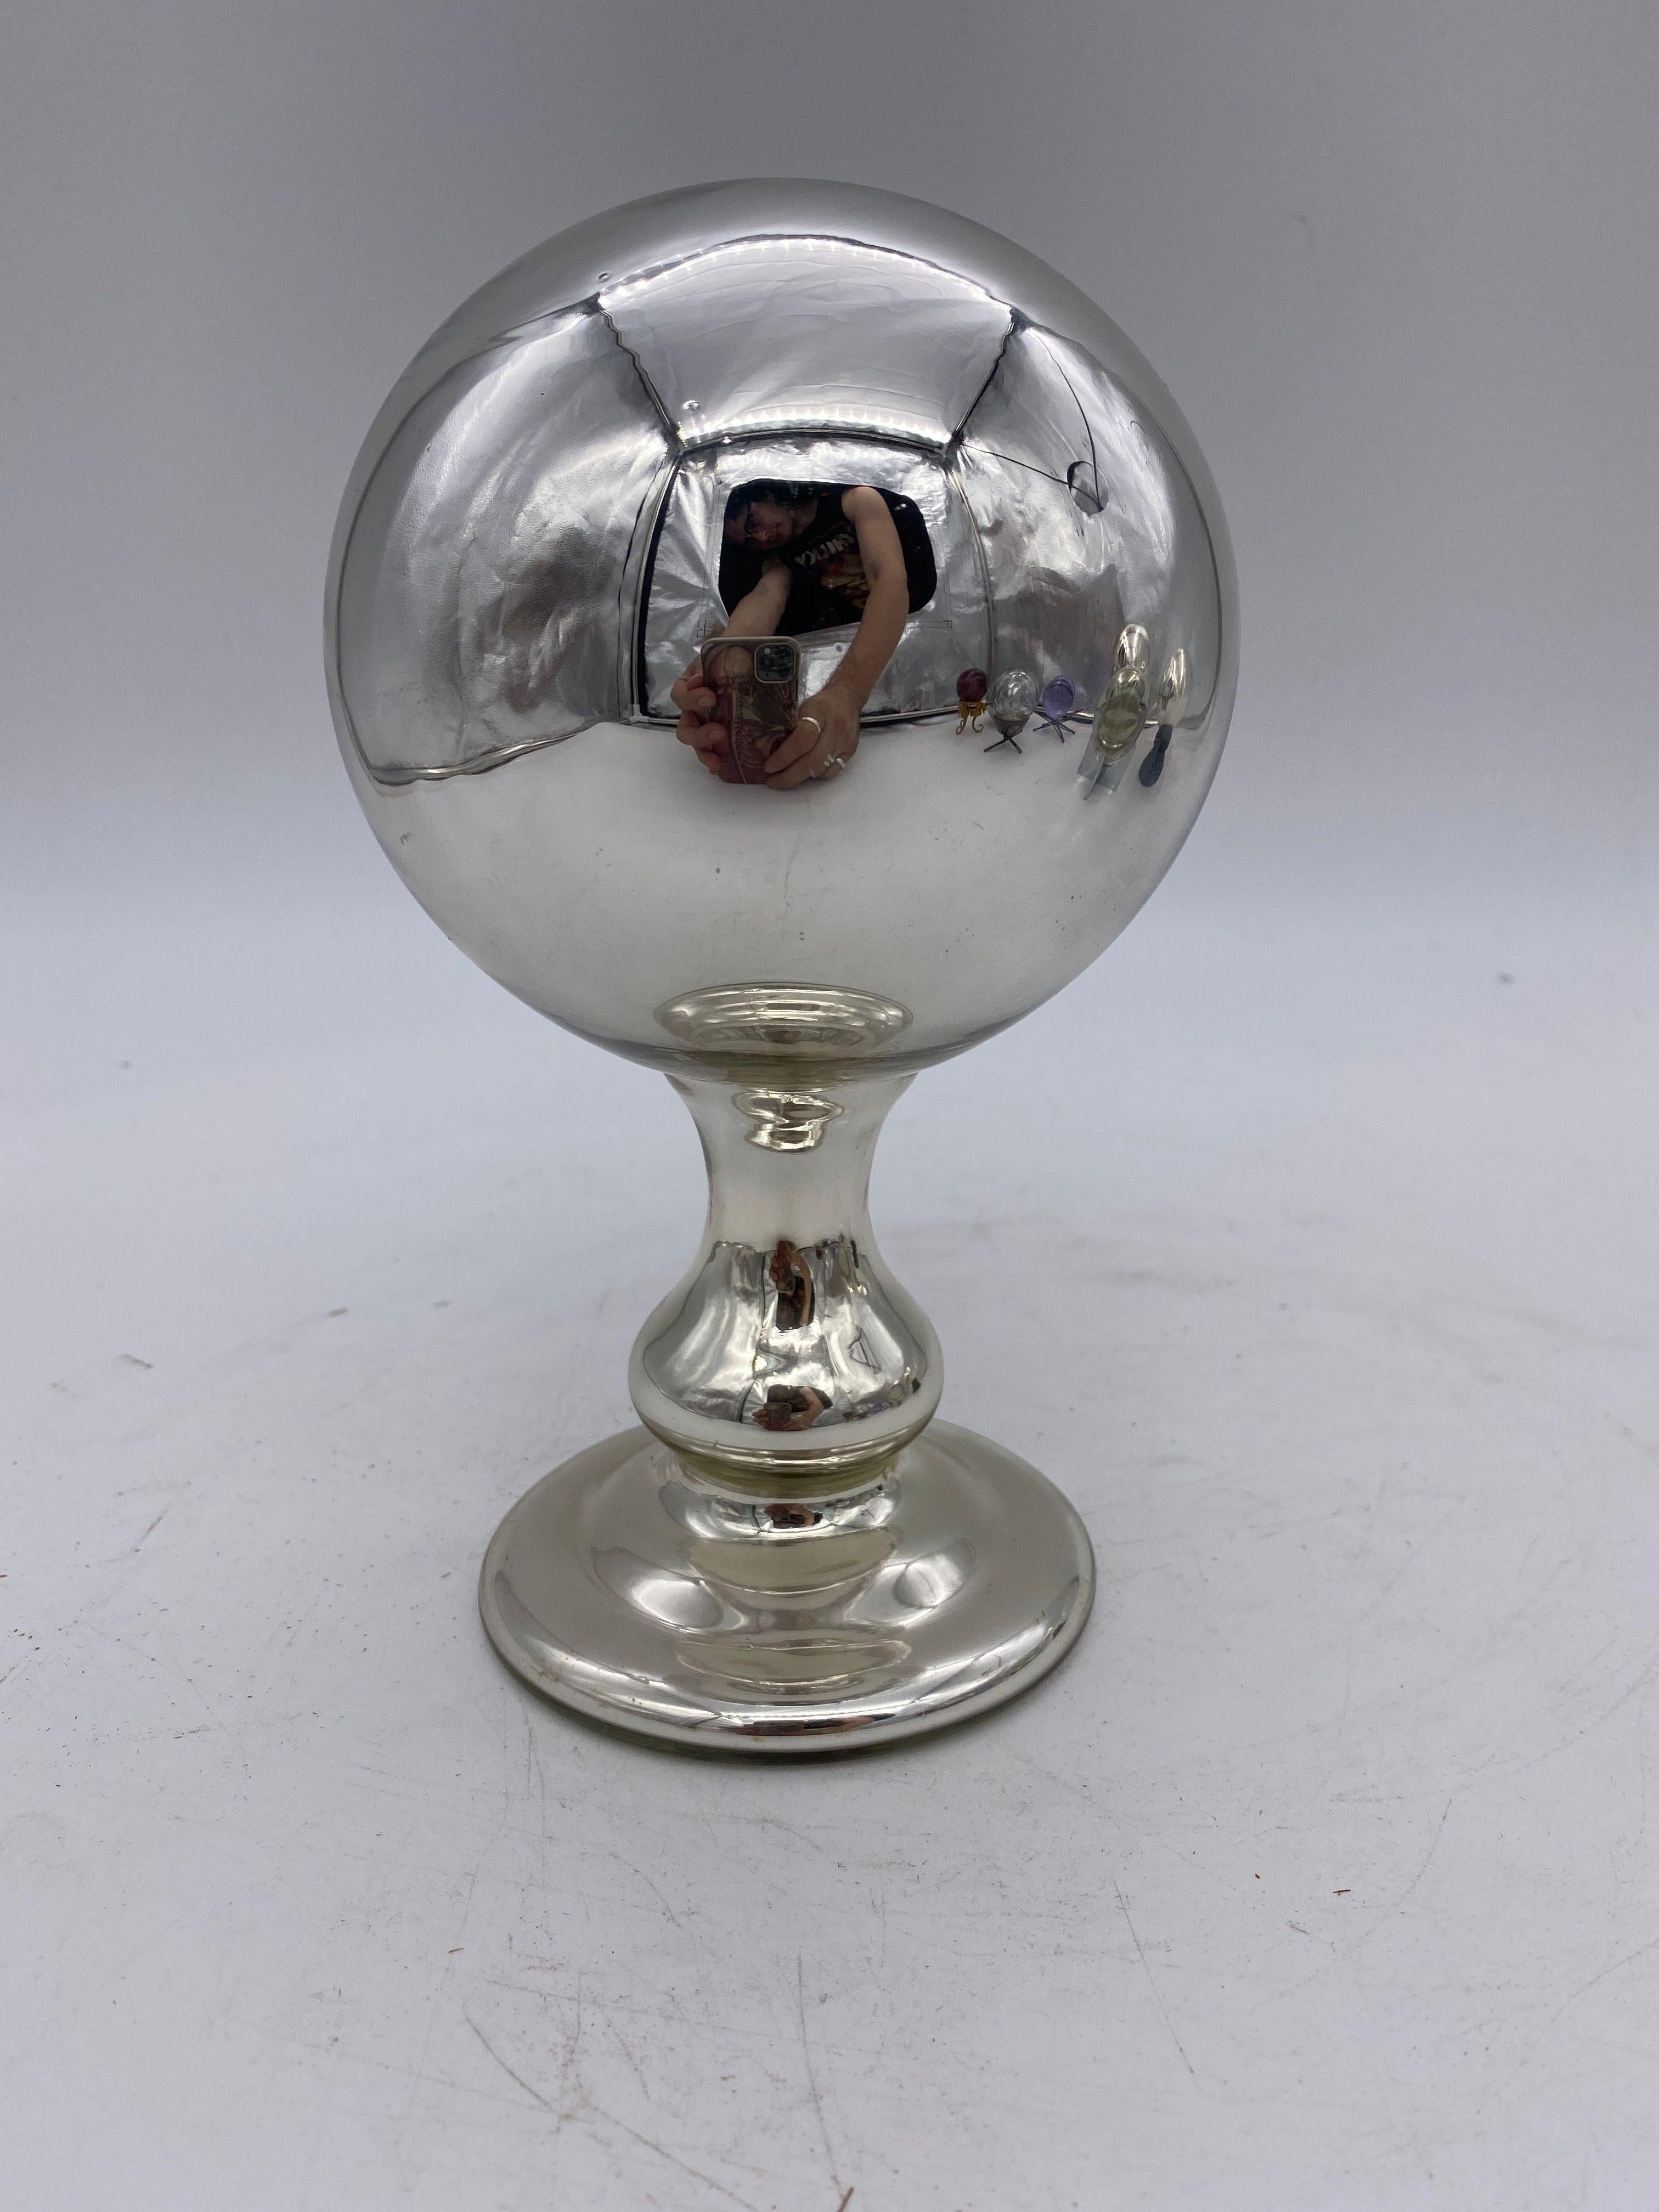 American Mercury Glass Sphere with Stands Collection